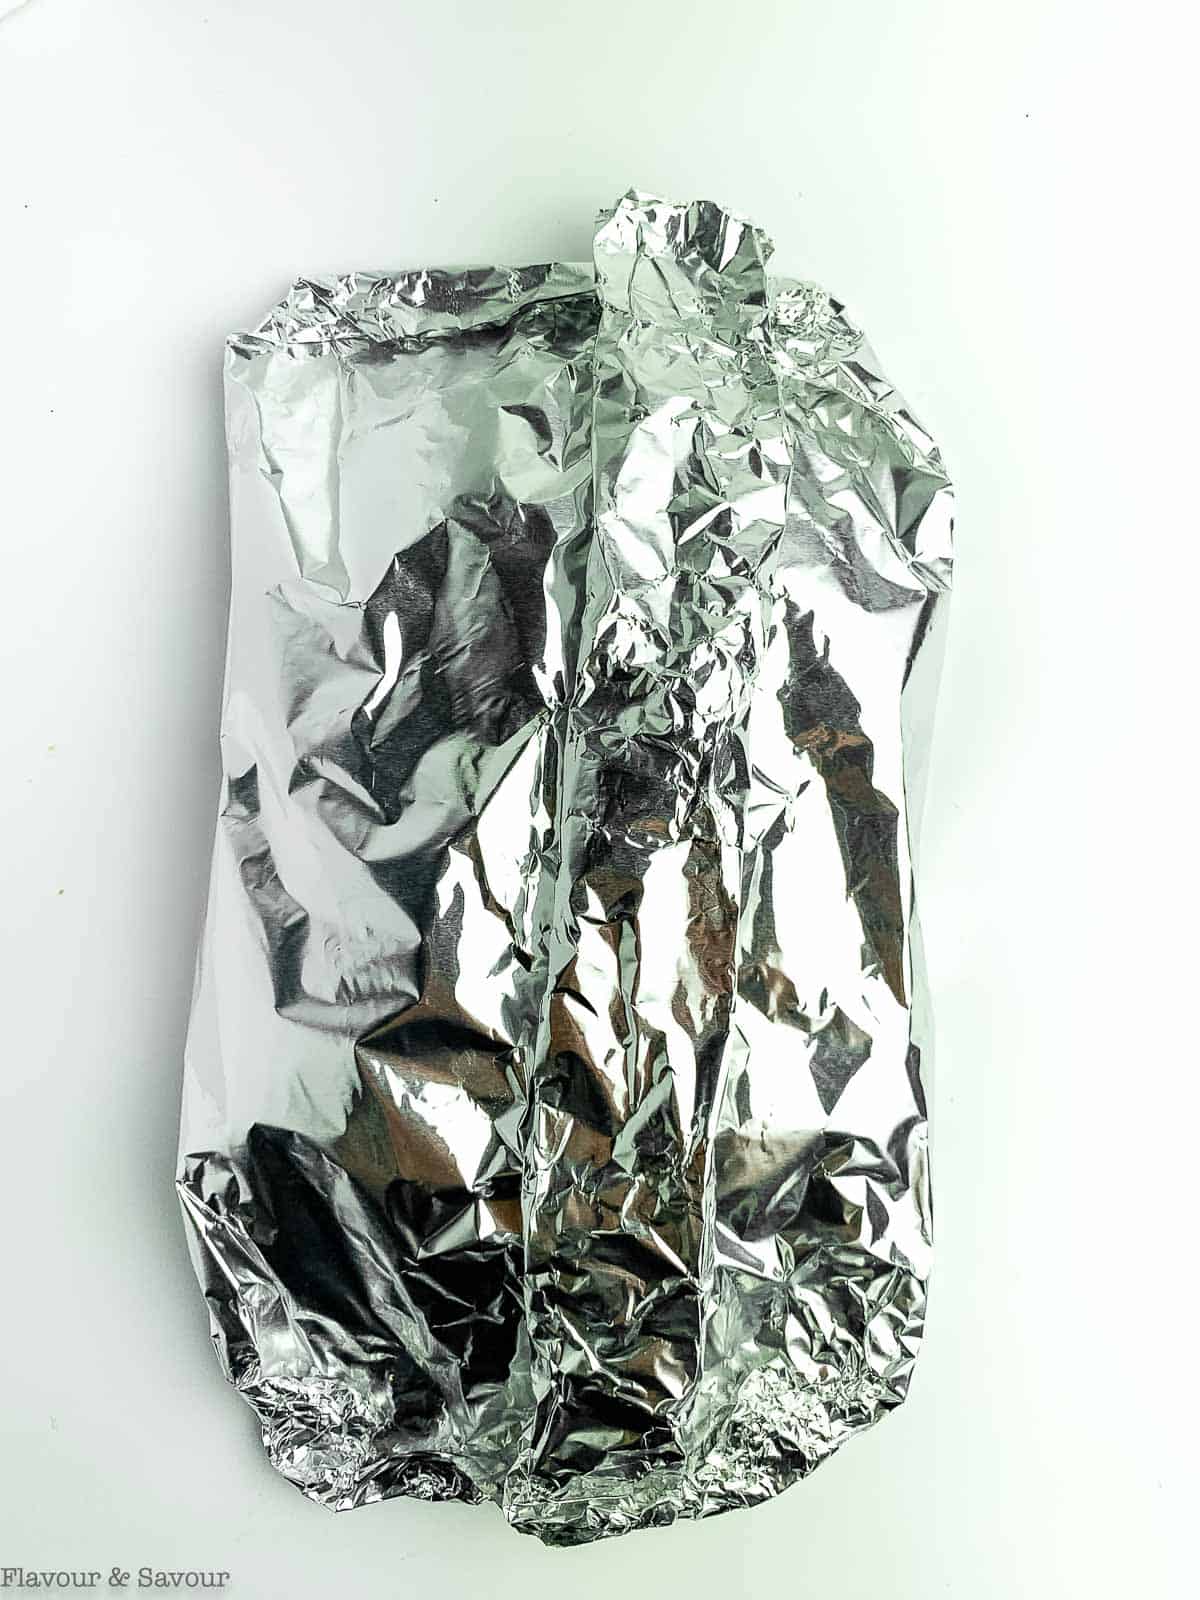 A foil packet of salmon and vegetables.